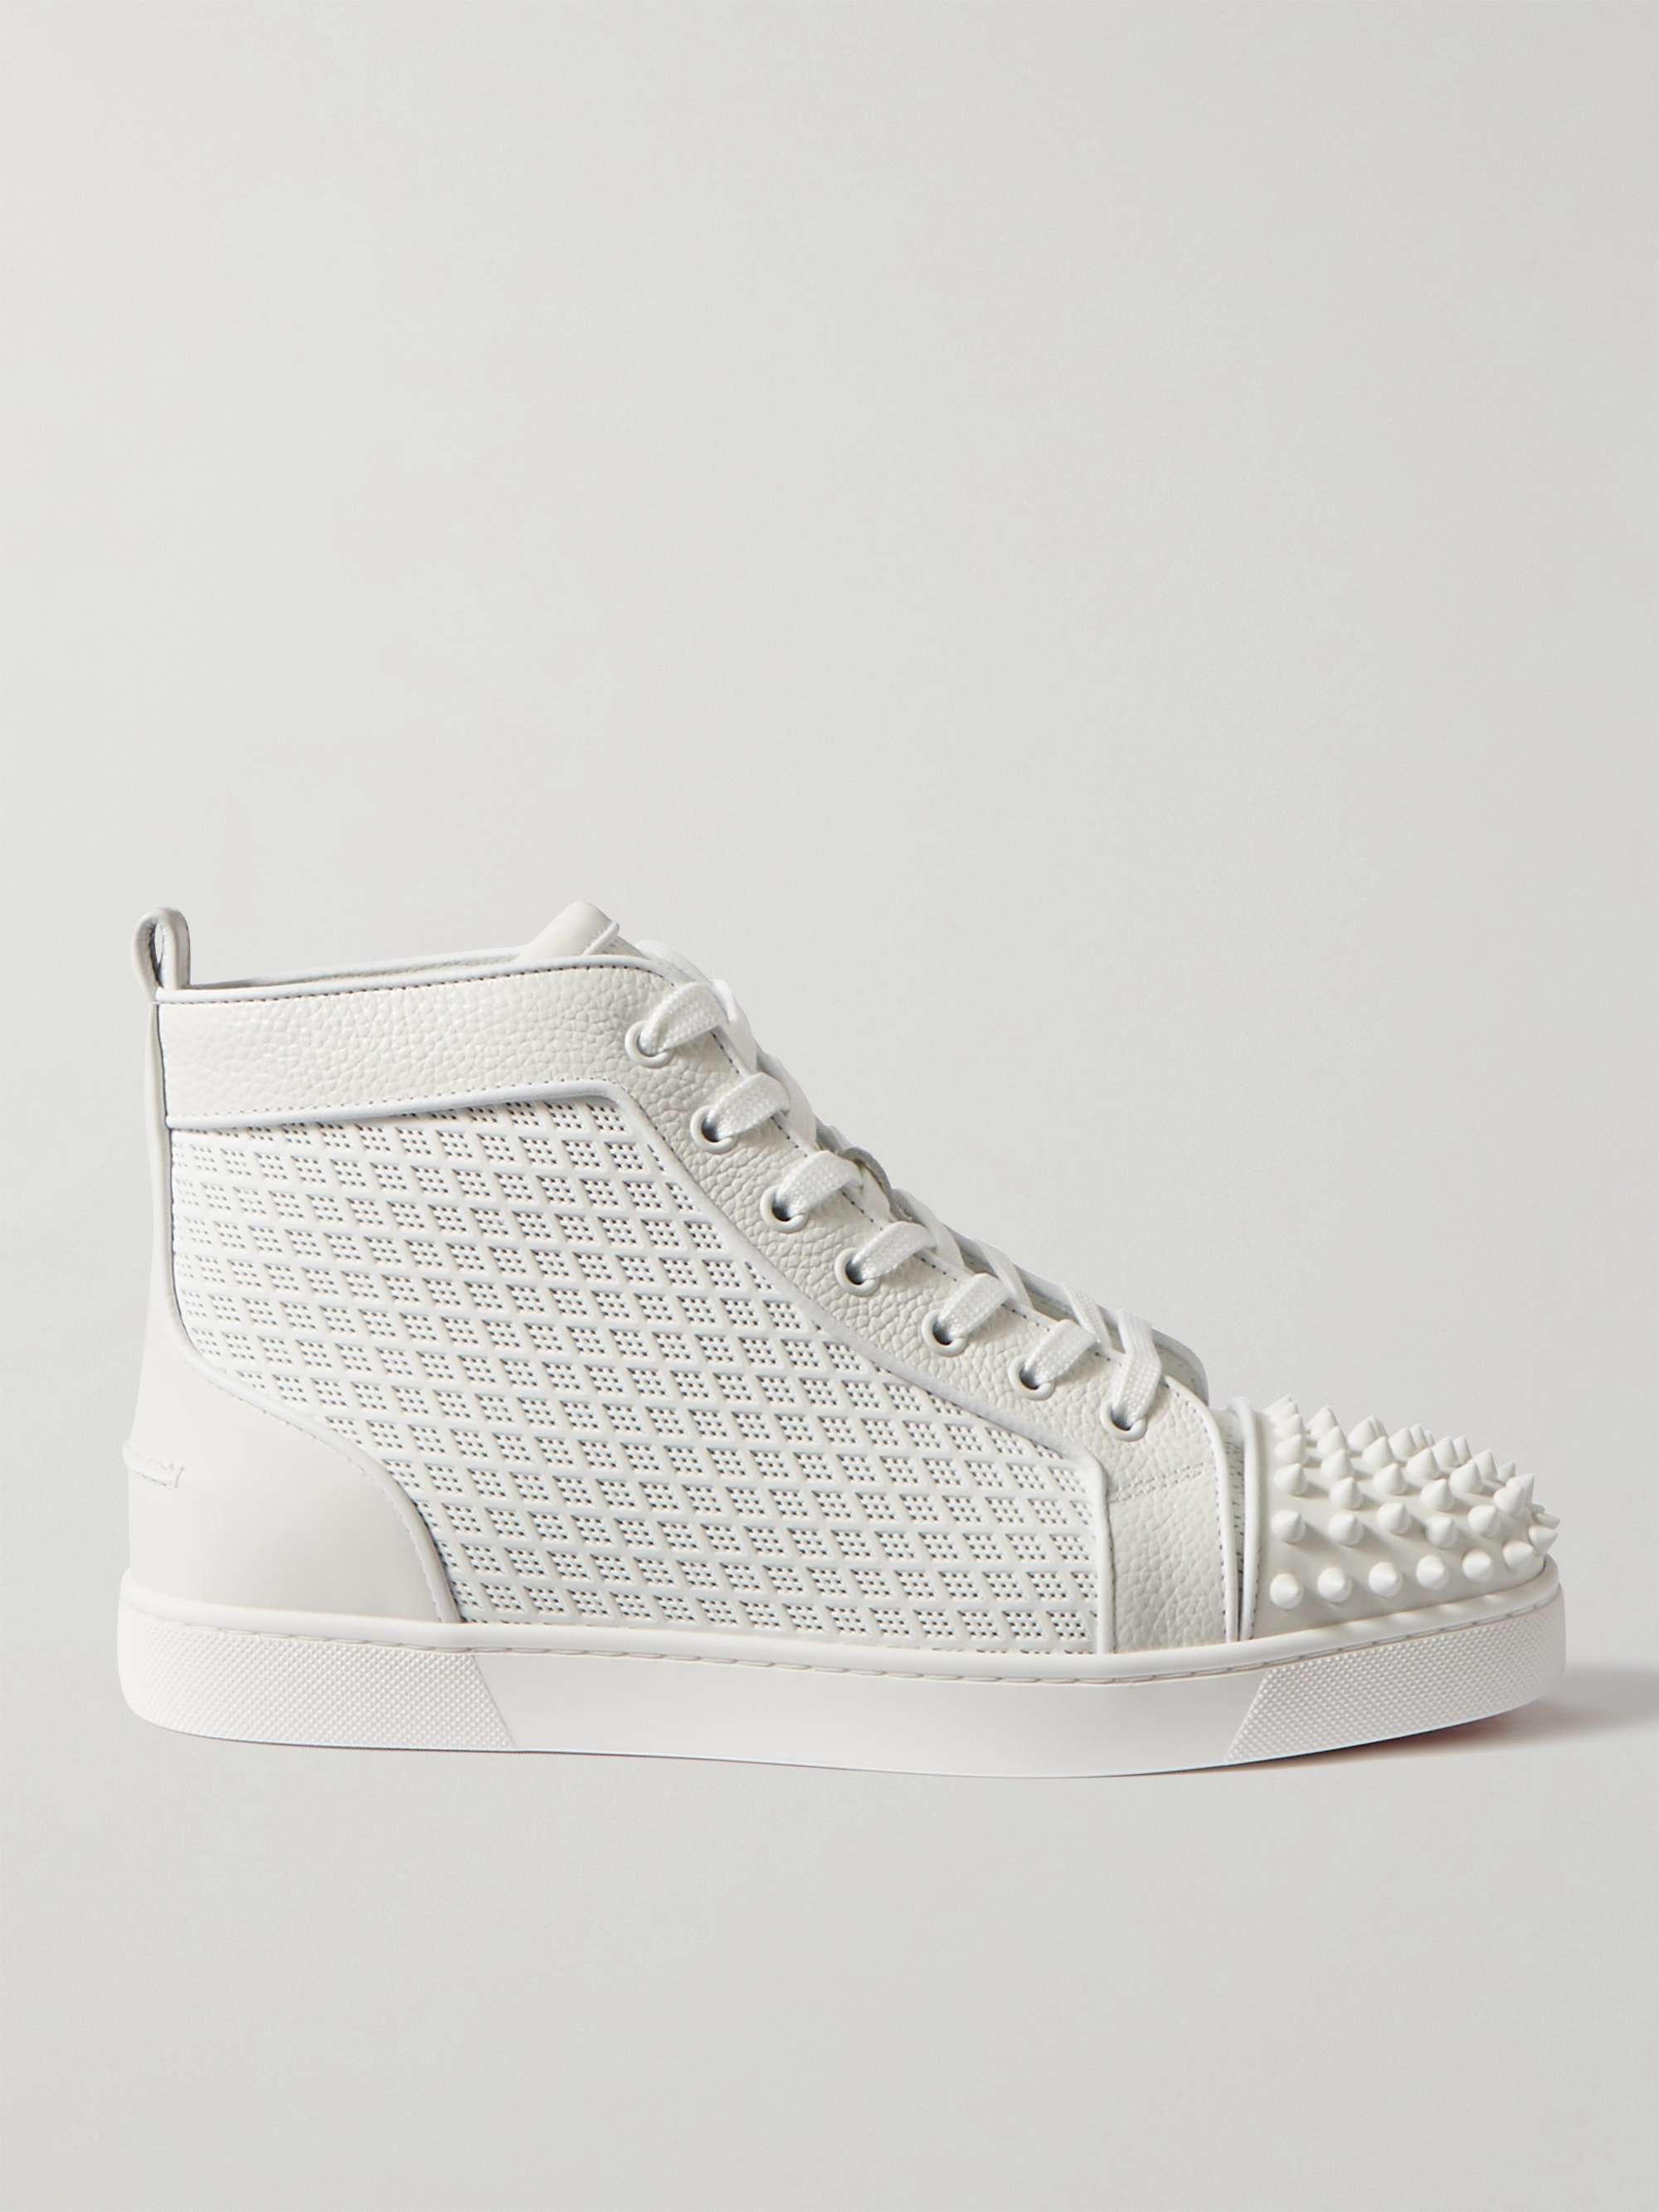 CHRISTIAN LOUBOUTIN Lou Spikes Orlato Studded Leather and Mesh High-Top for MR PORTER